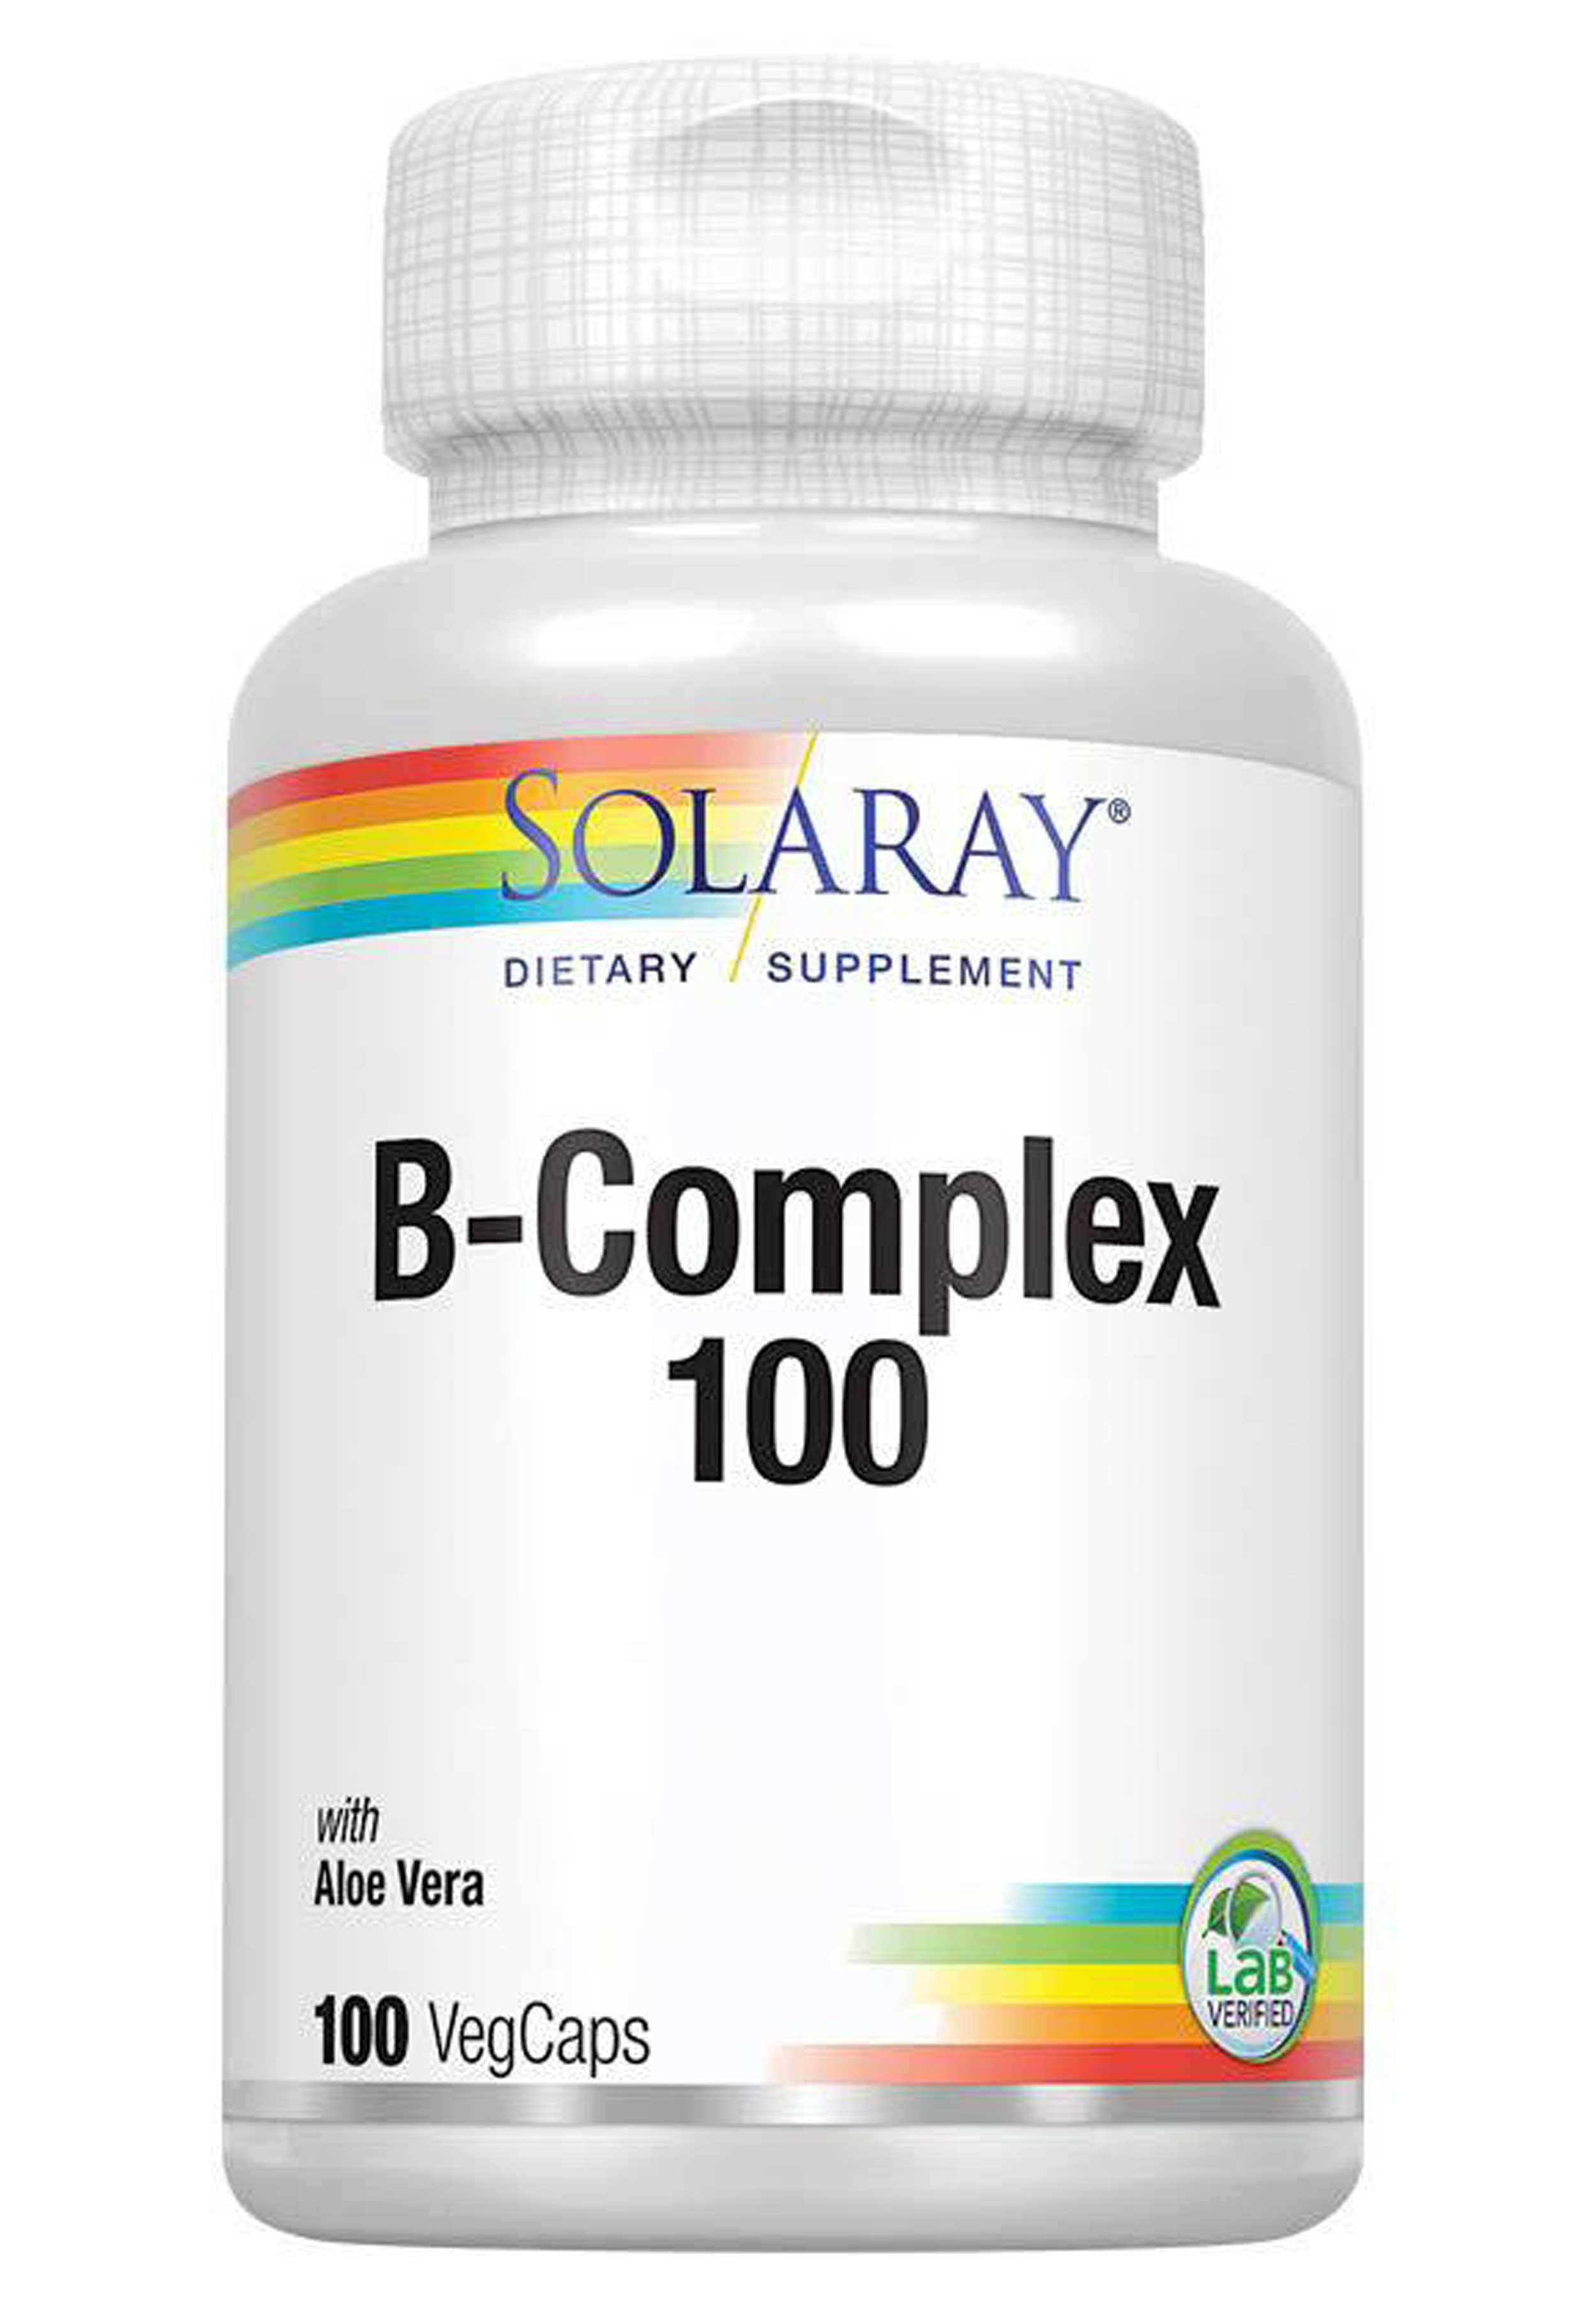 Solaray B-Complex 100mg Dietary Supplement - 100 Capsules